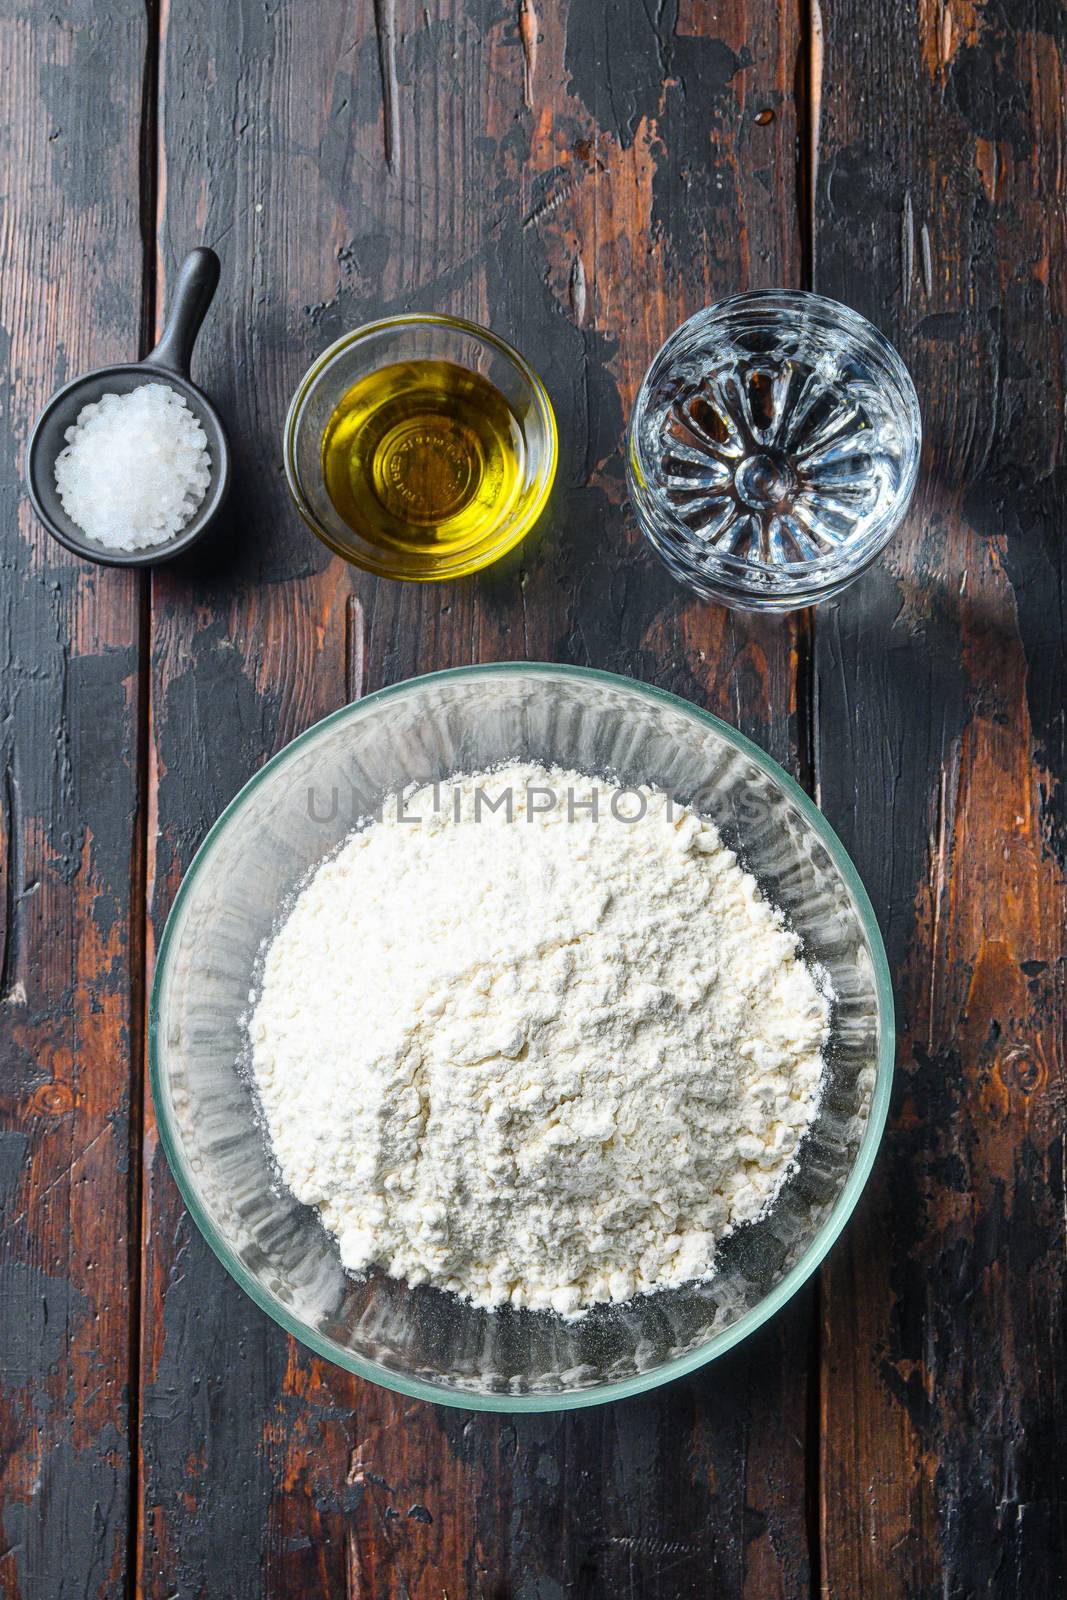 Ingredients for the dough, flour oil water and salt on wood background by Ilianesolenyi